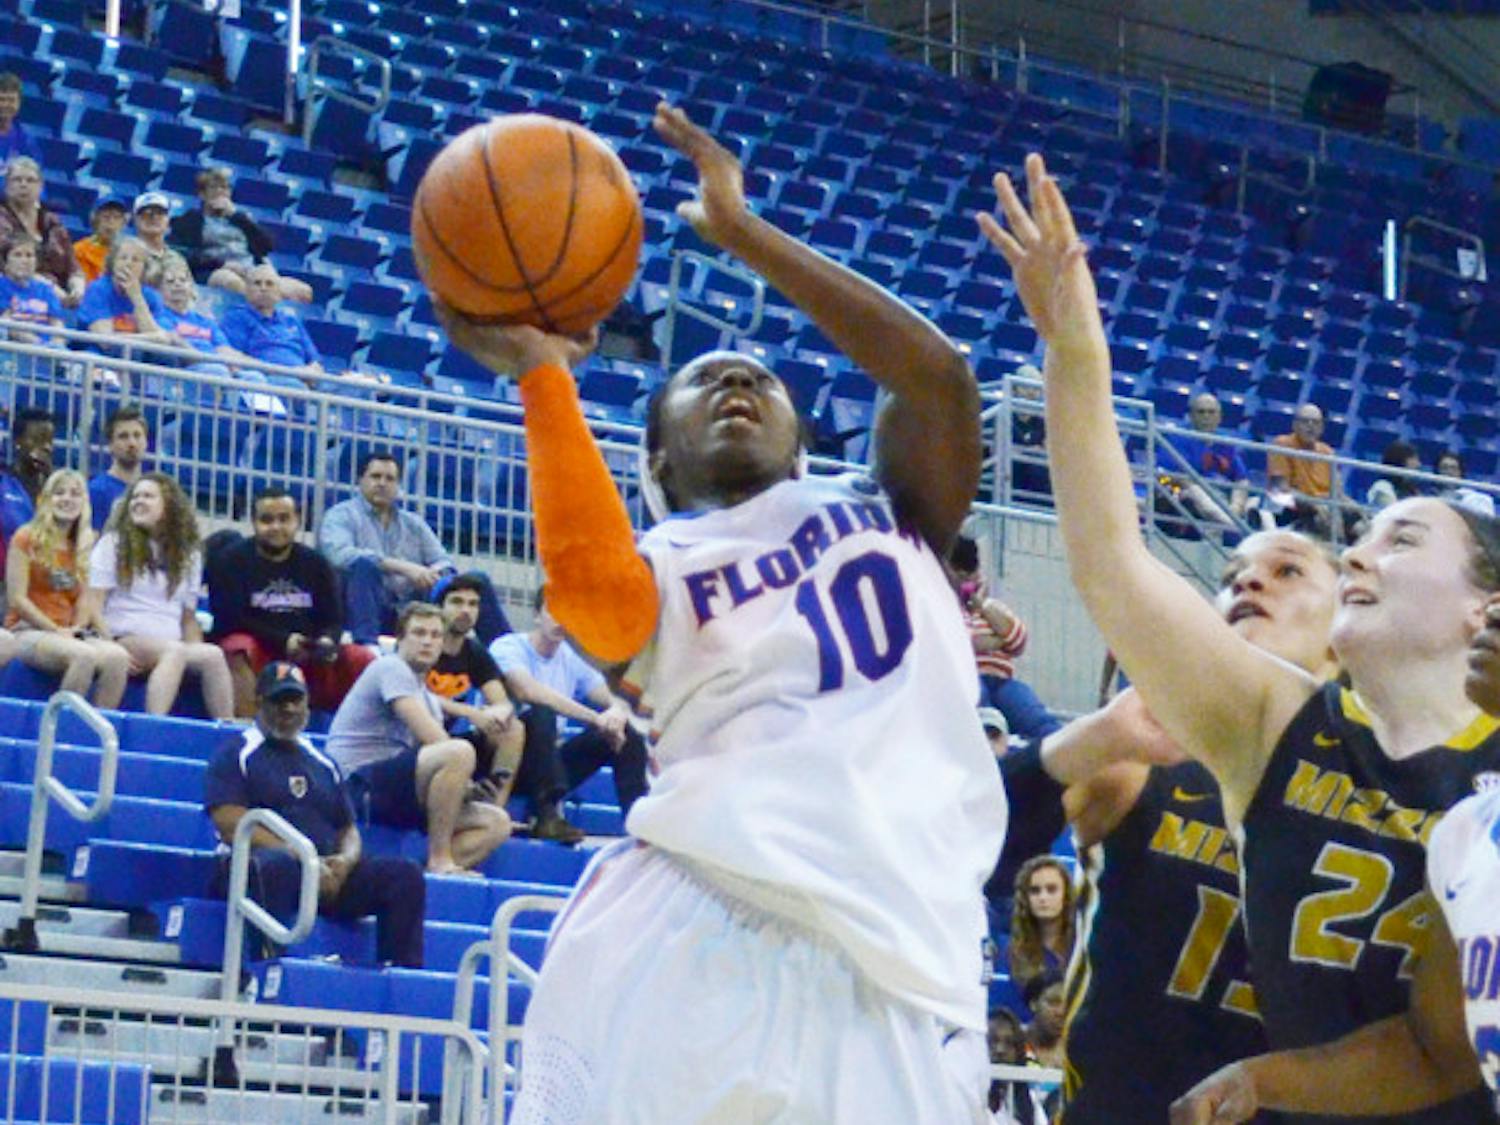 Jaterra Bonds attempts a shot during Florida’s 81-76 loss against Missouri on Thursday in the O’Connell Center.